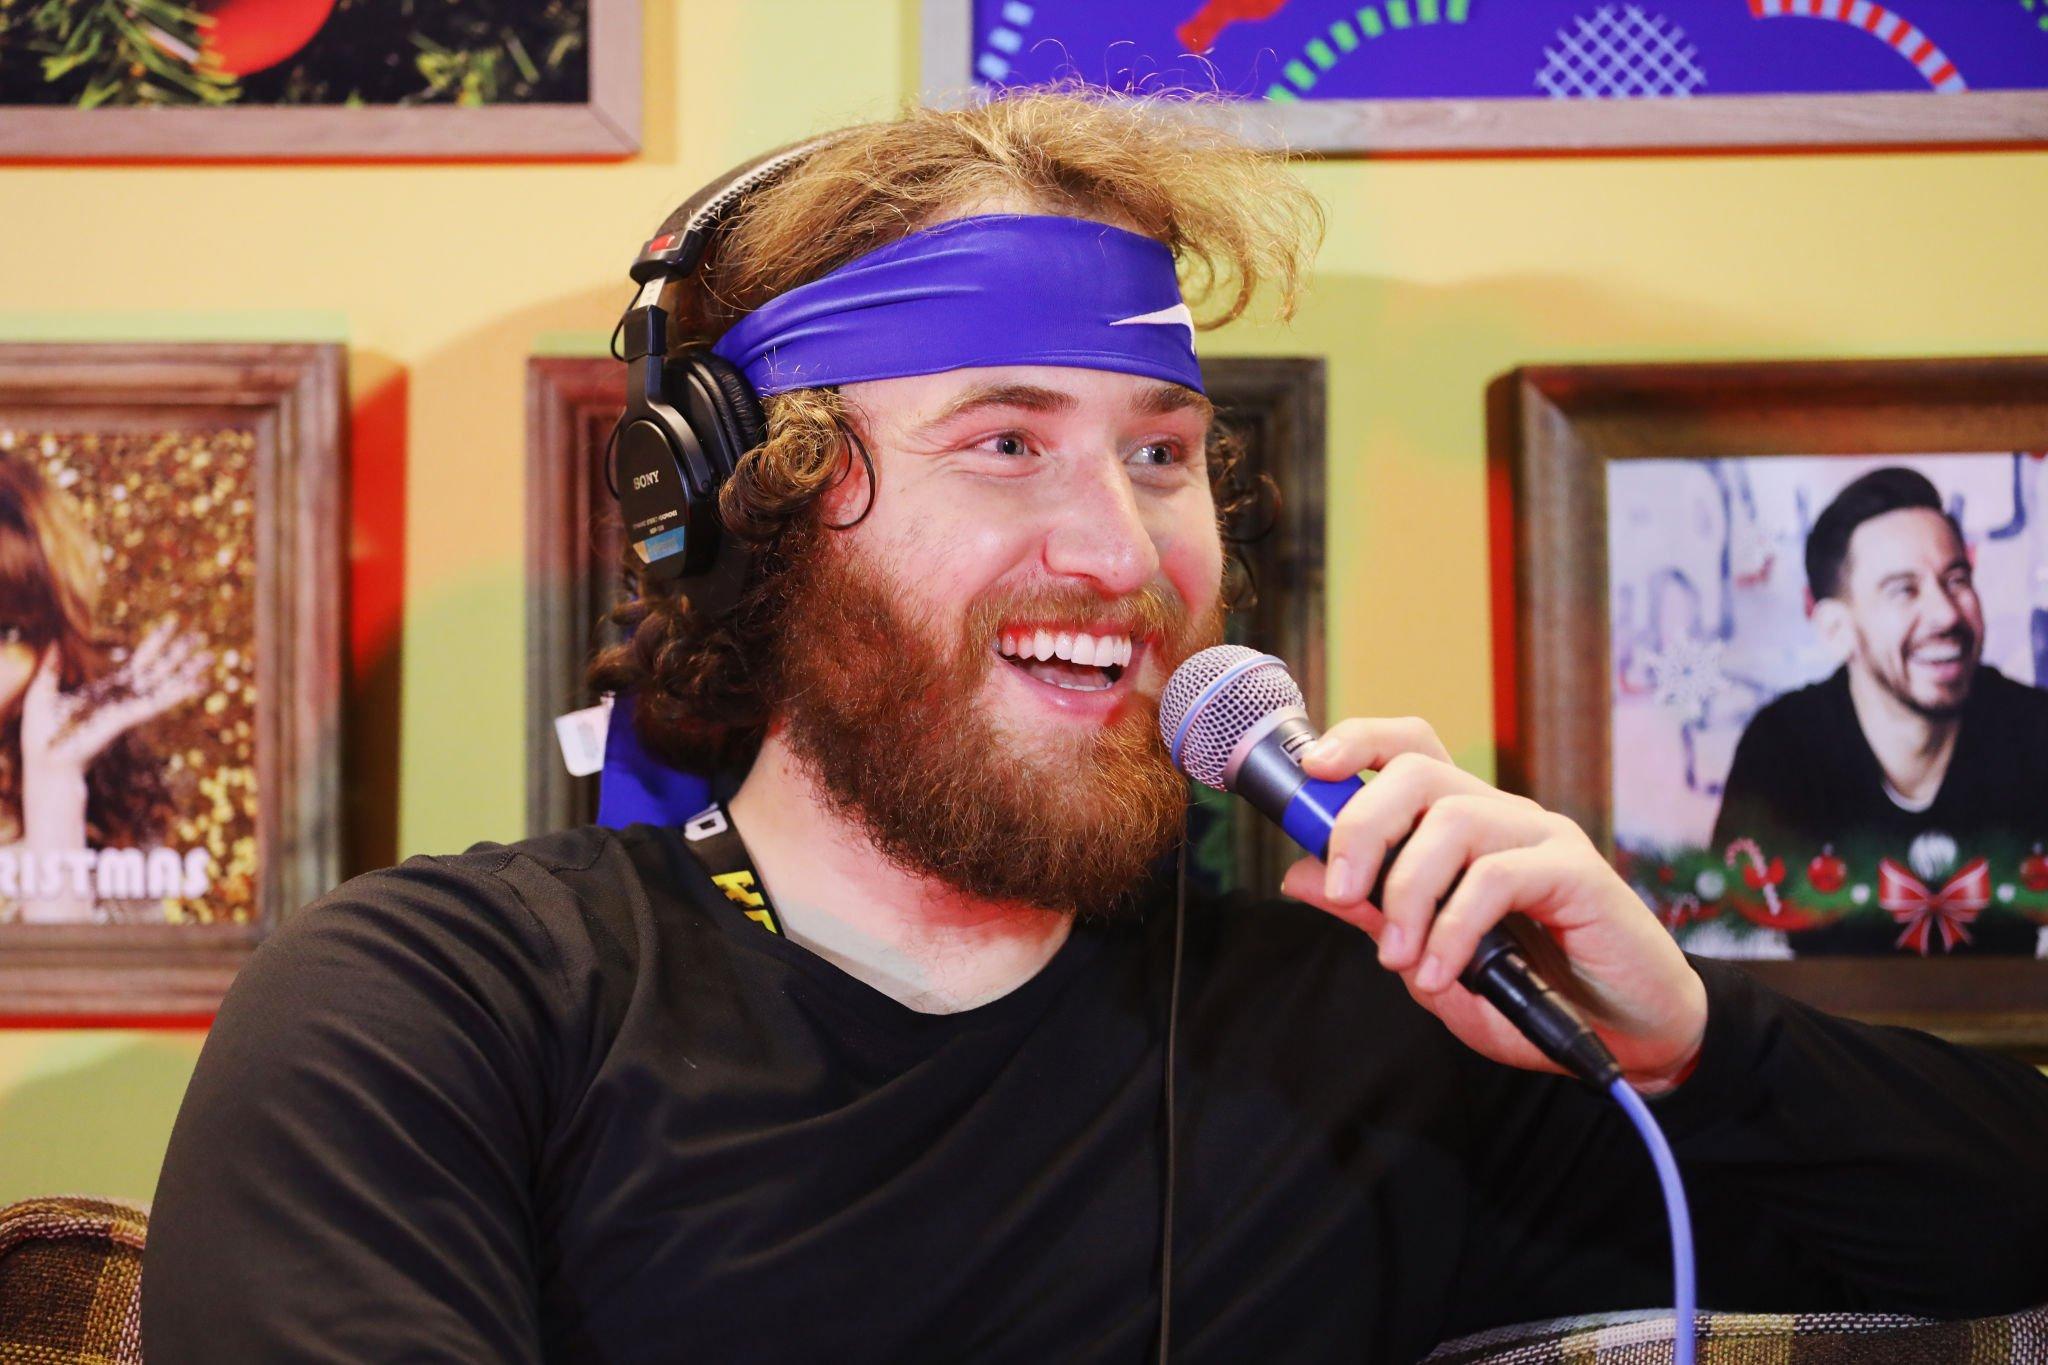 Mike Posner being interviewed backstage at KROQ's Absolut Almost Acoustic Christmas 2018
